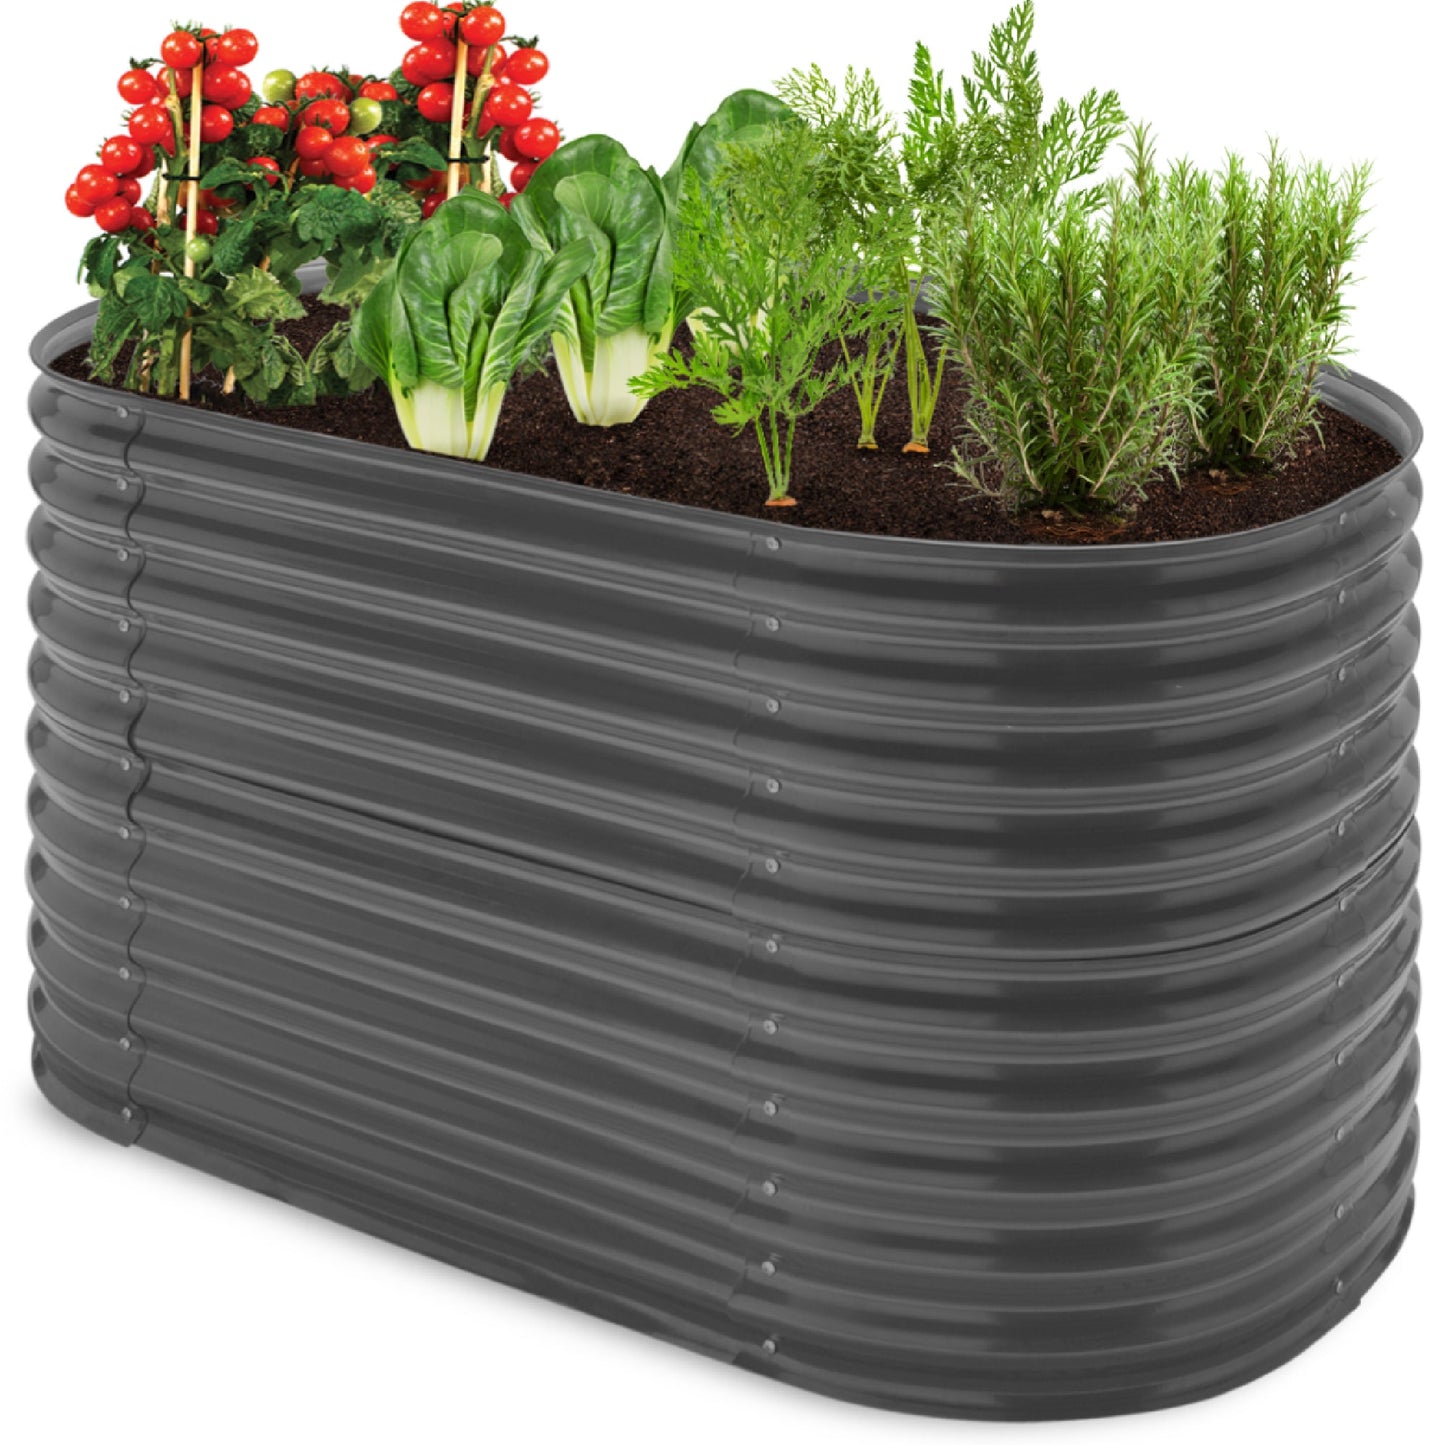 Raised Oval Garden Bed, Customizable Elevated Outdoor Metal Planter - 63in